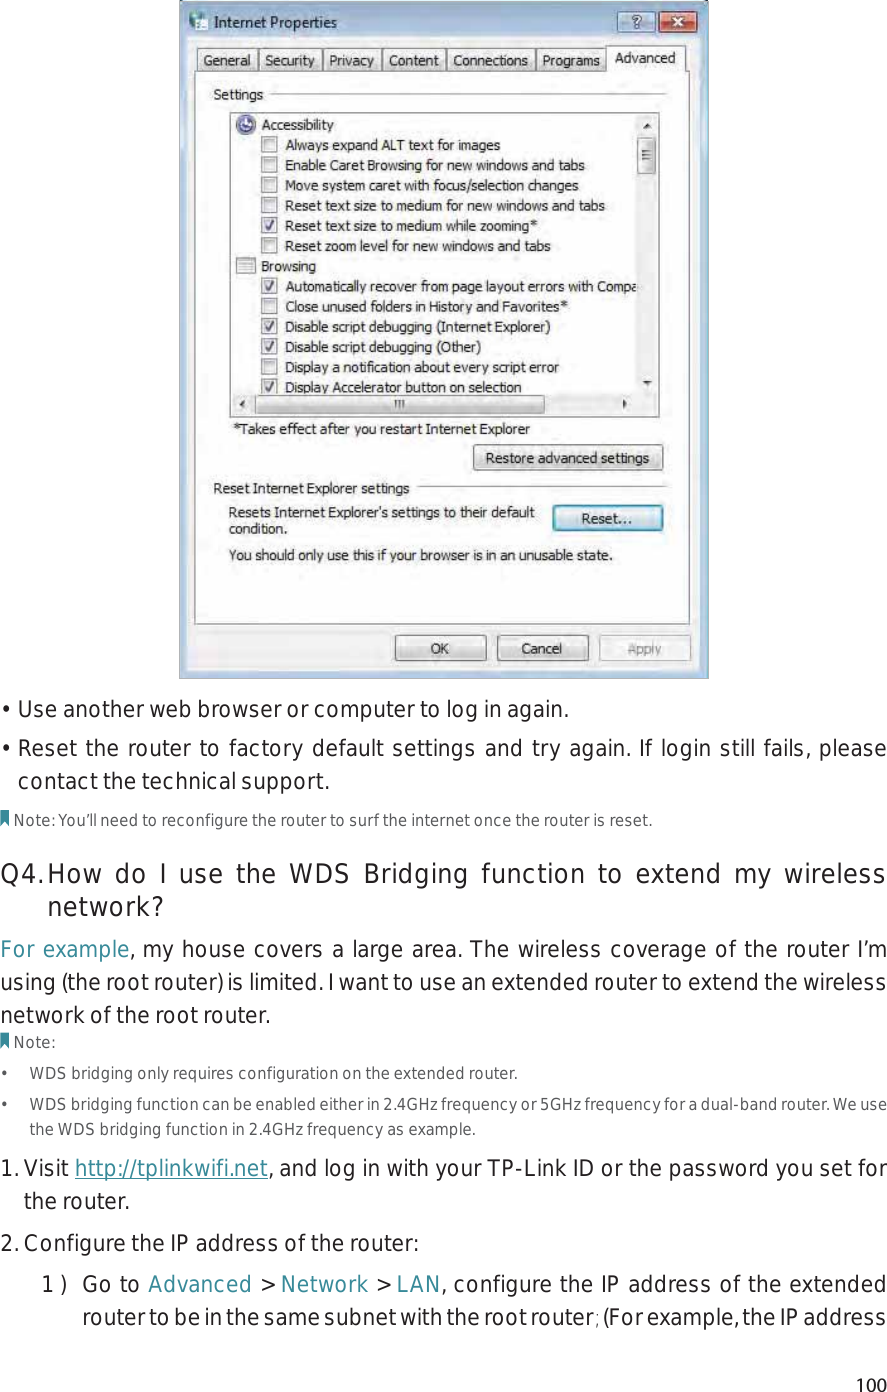 100• Use another web browser or computer to log in again.• Reset the router to factory default settings and try again. If login still fails, please contact the technical support.Note: You’ll need to reconfigure the router to surf the internet once the router is reset.Q4. How do I use the WDS Bridging function to extend my wireless network?For example, my house covers a large area. The wireless coverage of the router I’m using (the root router) is limited. I want to use an extended router to extend the wireless network of the root router.Note:•  WDS bridging only requires configuration on the extended router.•  WDS bridging function can be enabled either in 2.4GHz frequency or 5GHz frequency for a dual-band router. We use the WDS bridging function in 2.4GHz frequency as example.1. Visit http://tplinkwifi.net, and log in with your TP-Link ID or the password you set for the router. 2. Configure the IP address of the router:1 )  Go to Advanced &gt; Network &gt; LAN, configure the IP address of the extended router to be in the same subnet with the root router; (For example, the IP address 